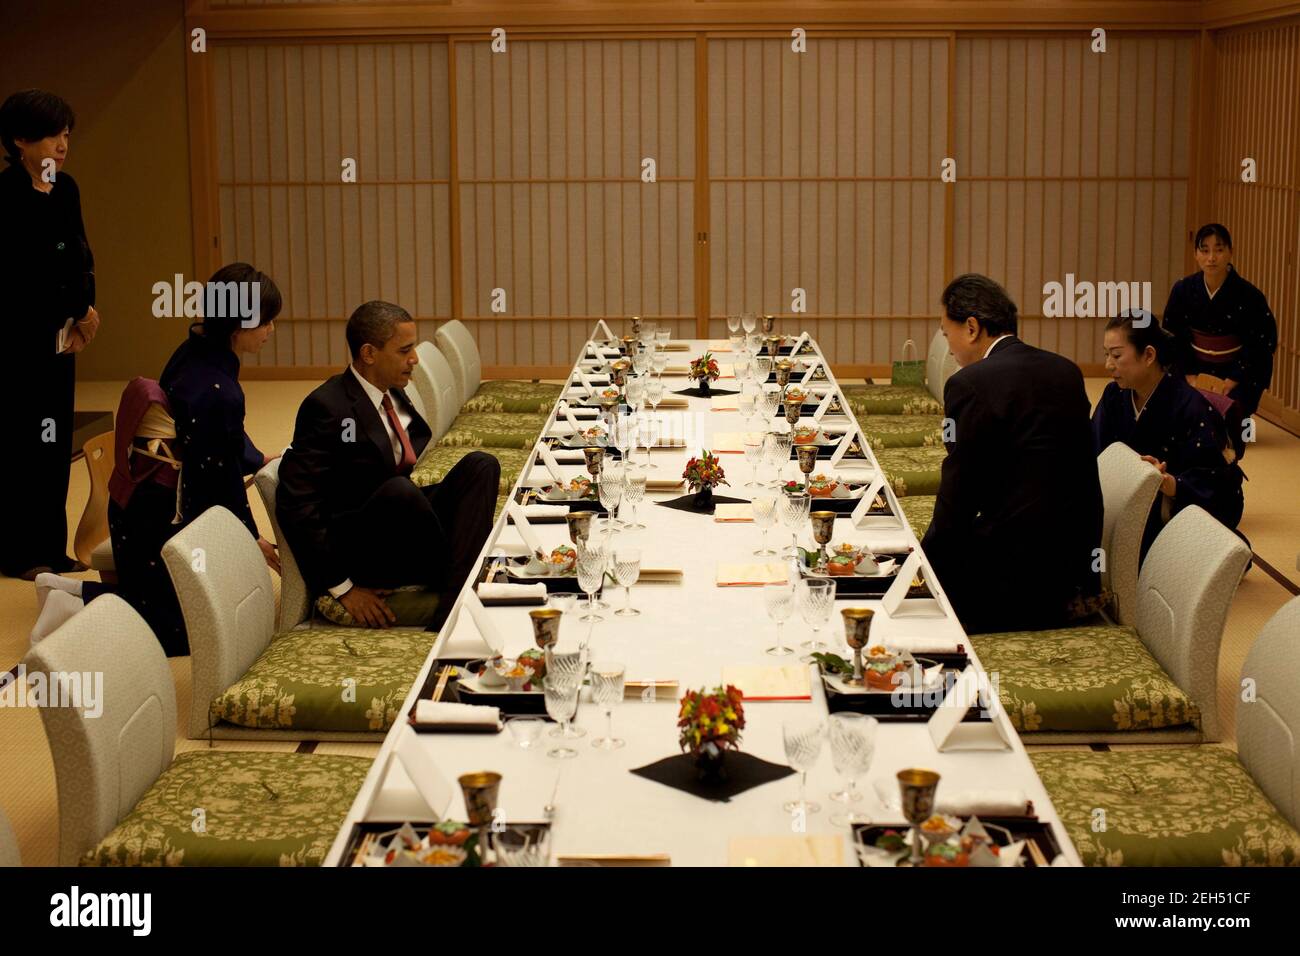 President Barack Obama takes his seat at a dinner with Japanese Prime Minister Yukio Hatoyama at Kantei, the Prime Minister's office and official residence in Tokyo, Japan, Nov. 13, 2009. Stock Photo